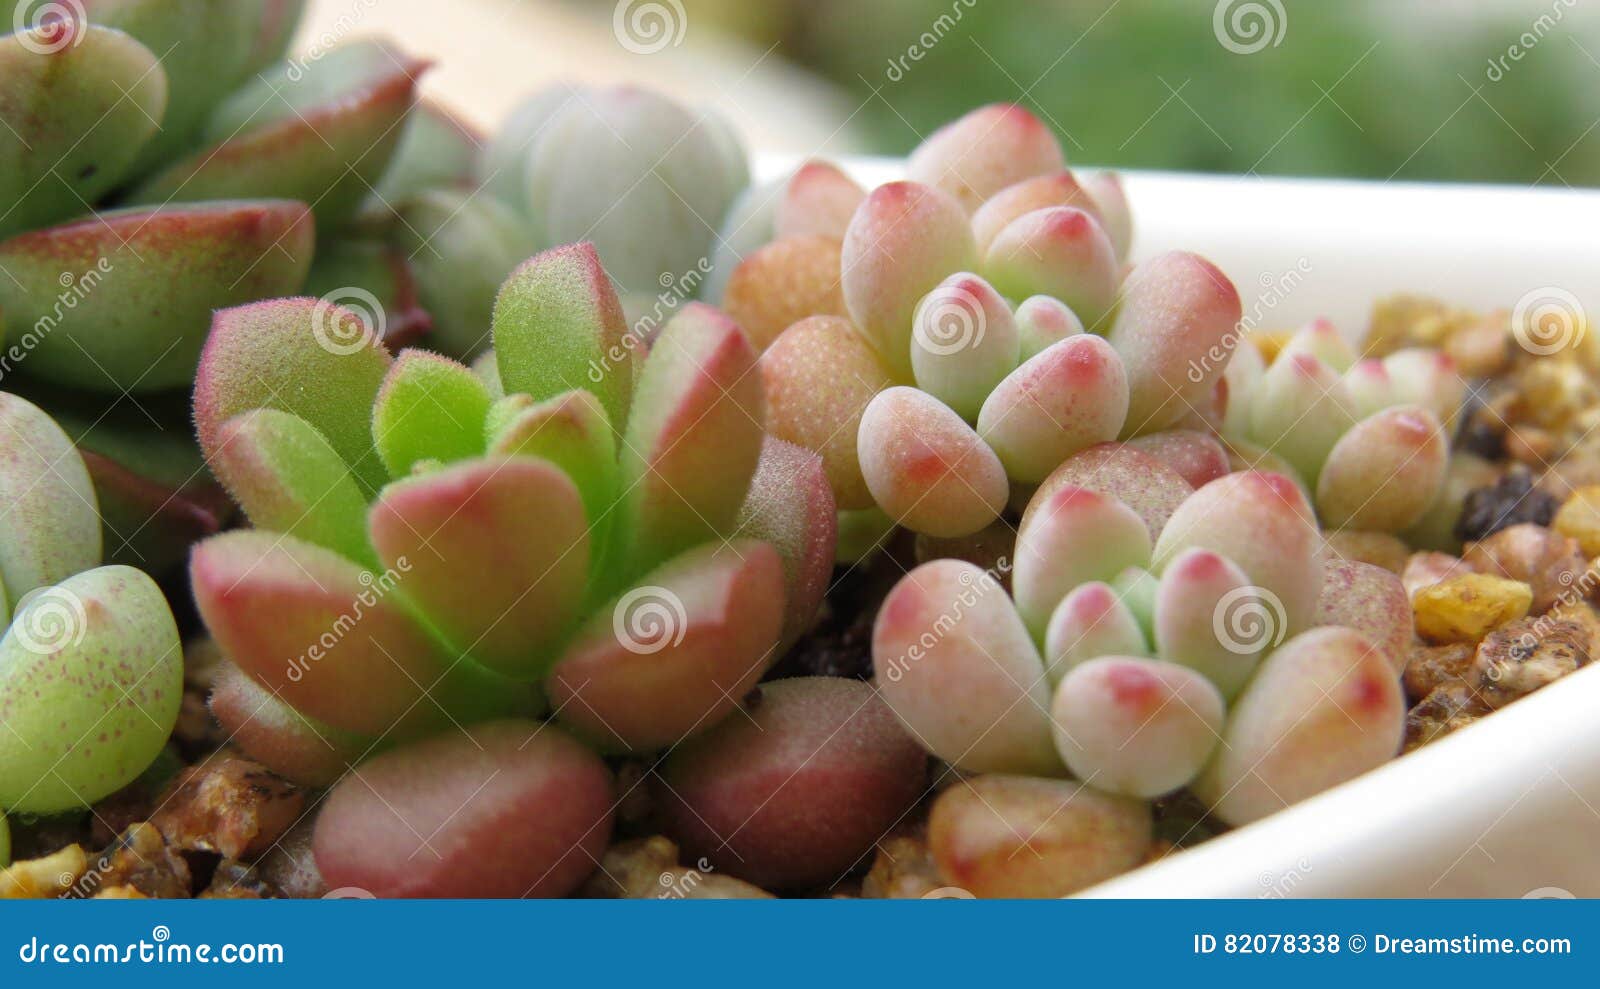 lovely succulents